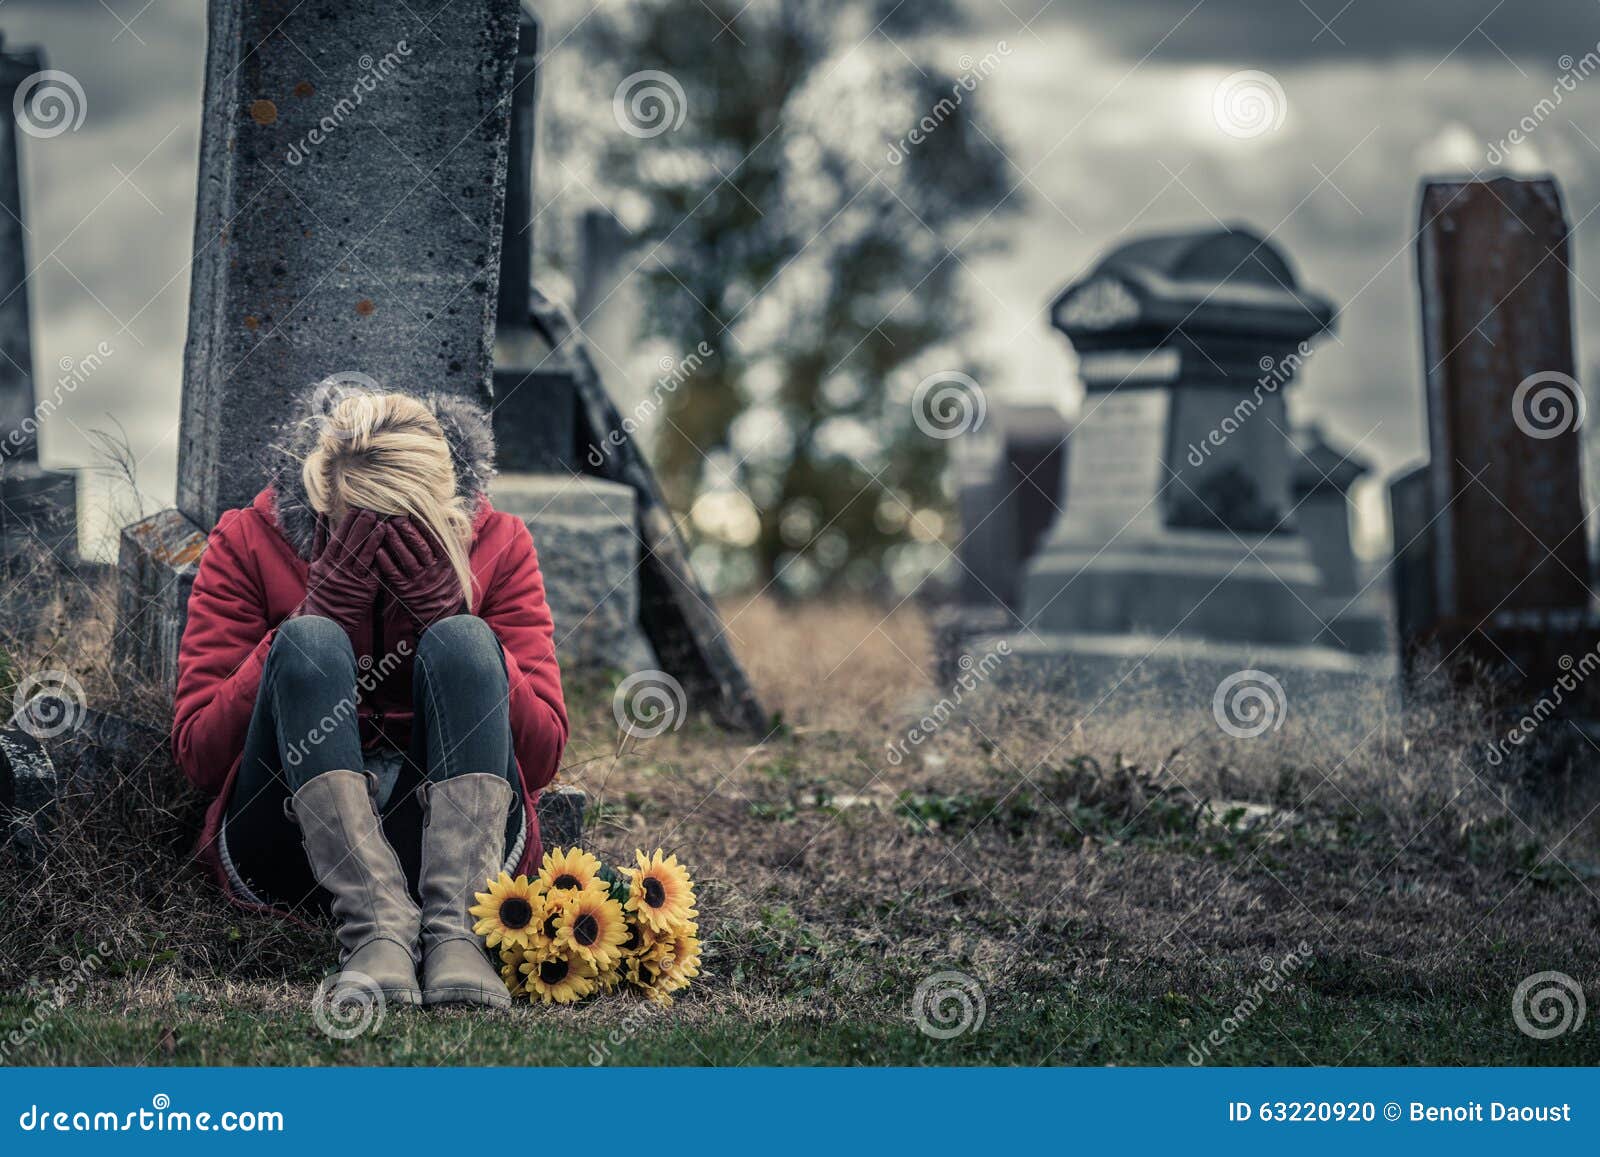 lonely sad young woman in mourning in front of a gravestone